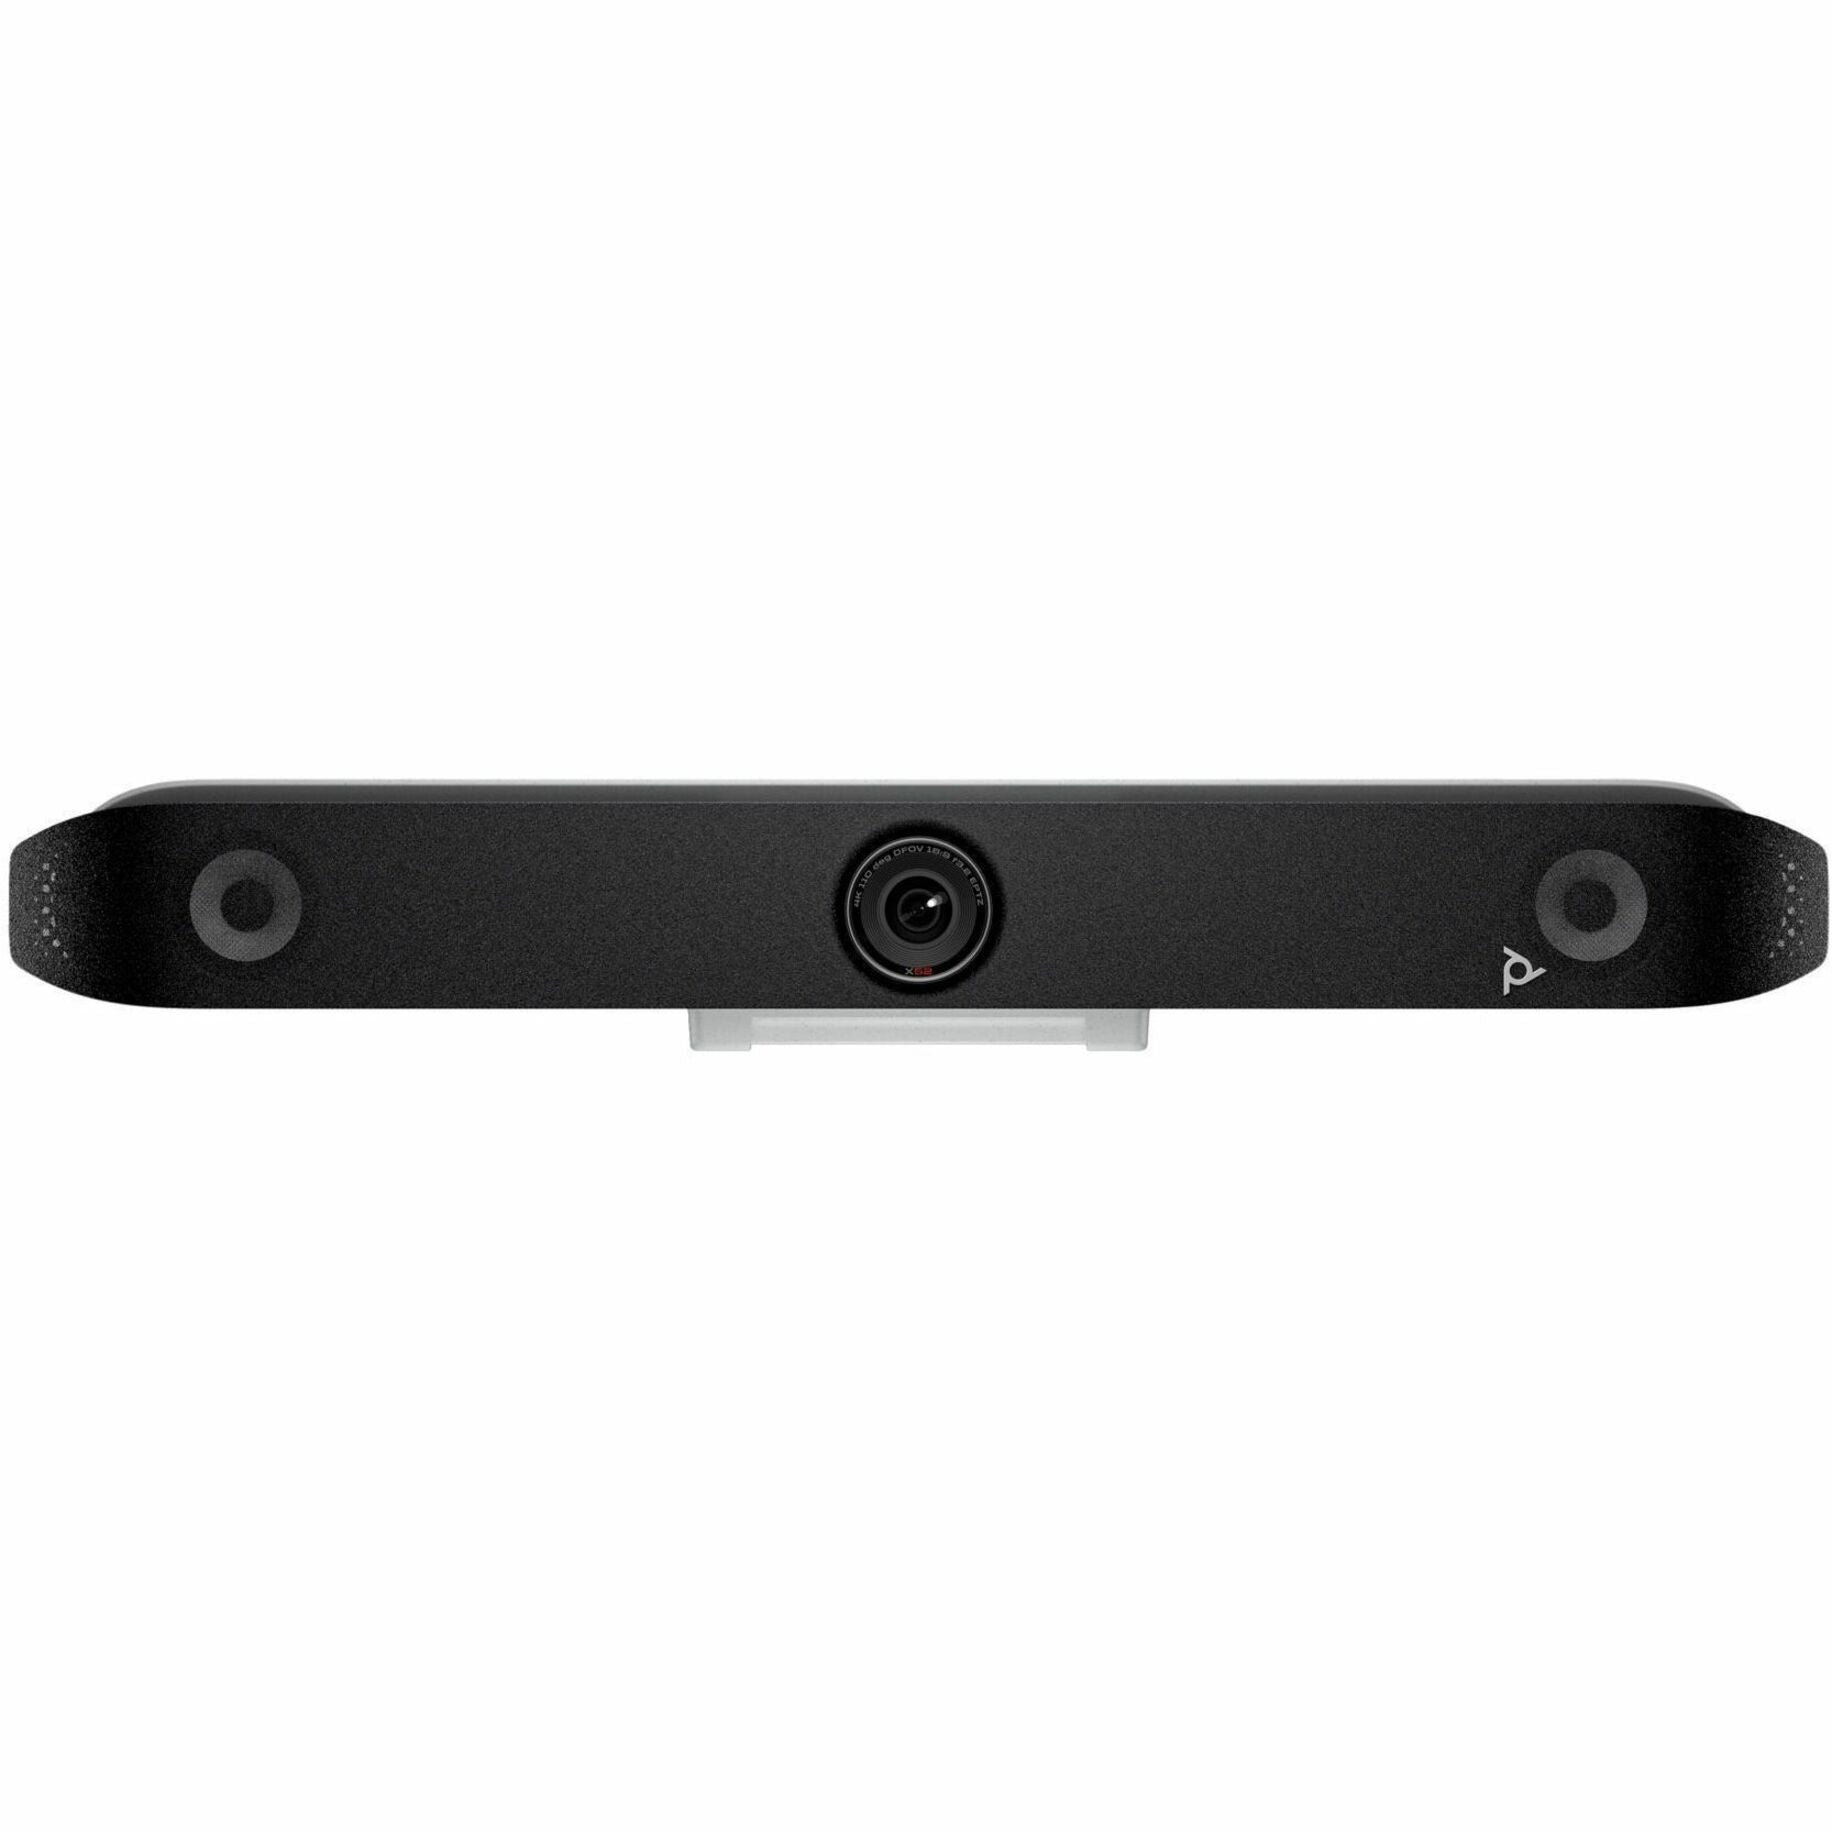 Poly Studio X52 All-In-One Video Bar with TC10 Controller Kit, 4K UHD, 60 fps, Video Conferencing, Meeting Room